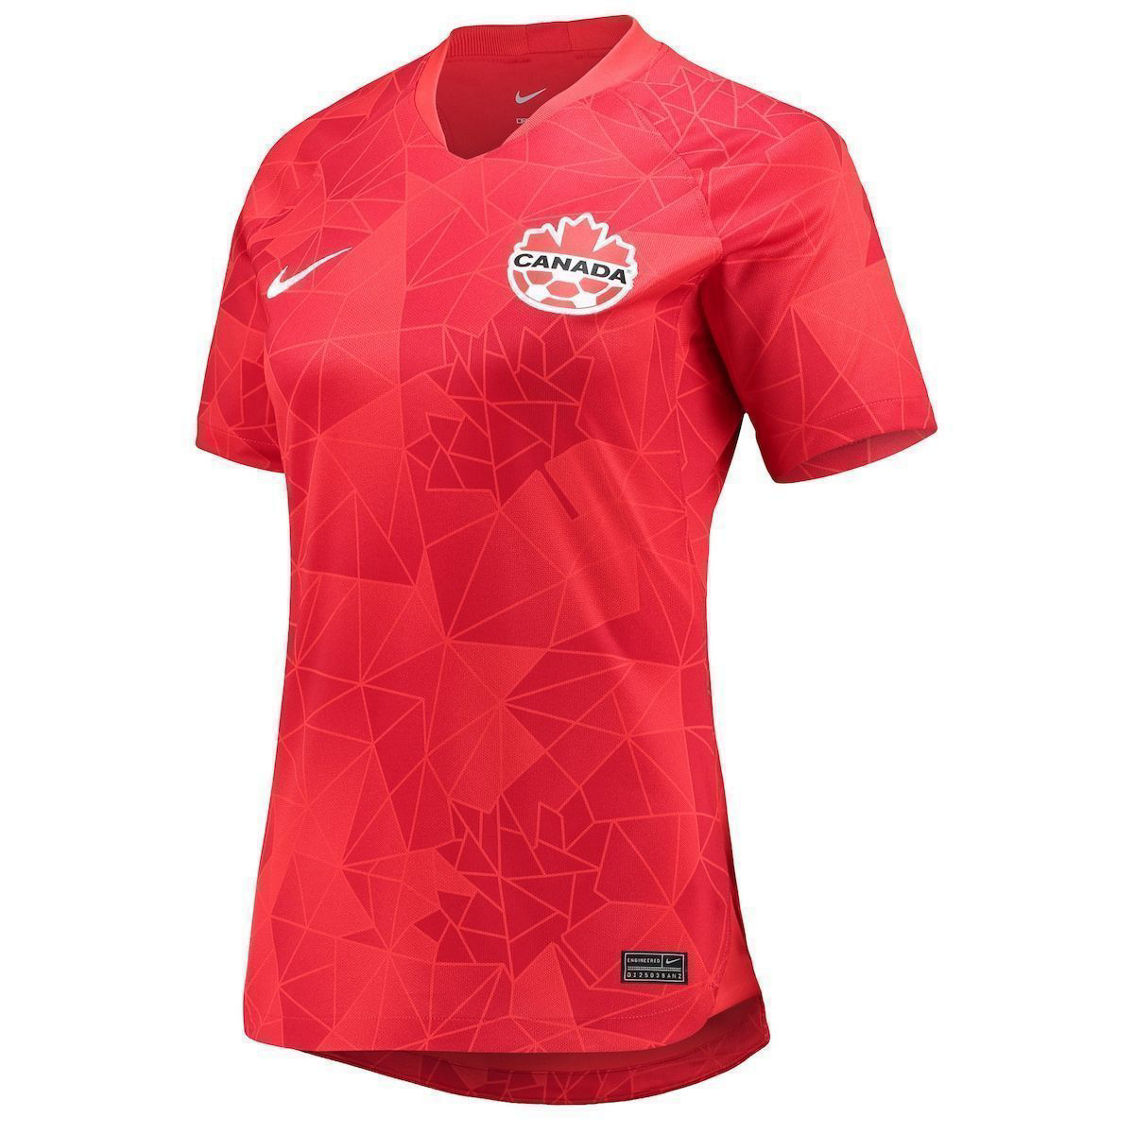 Nike Women's Red Canada Women's National Team Home Replica Jersey - Image 3 of 4